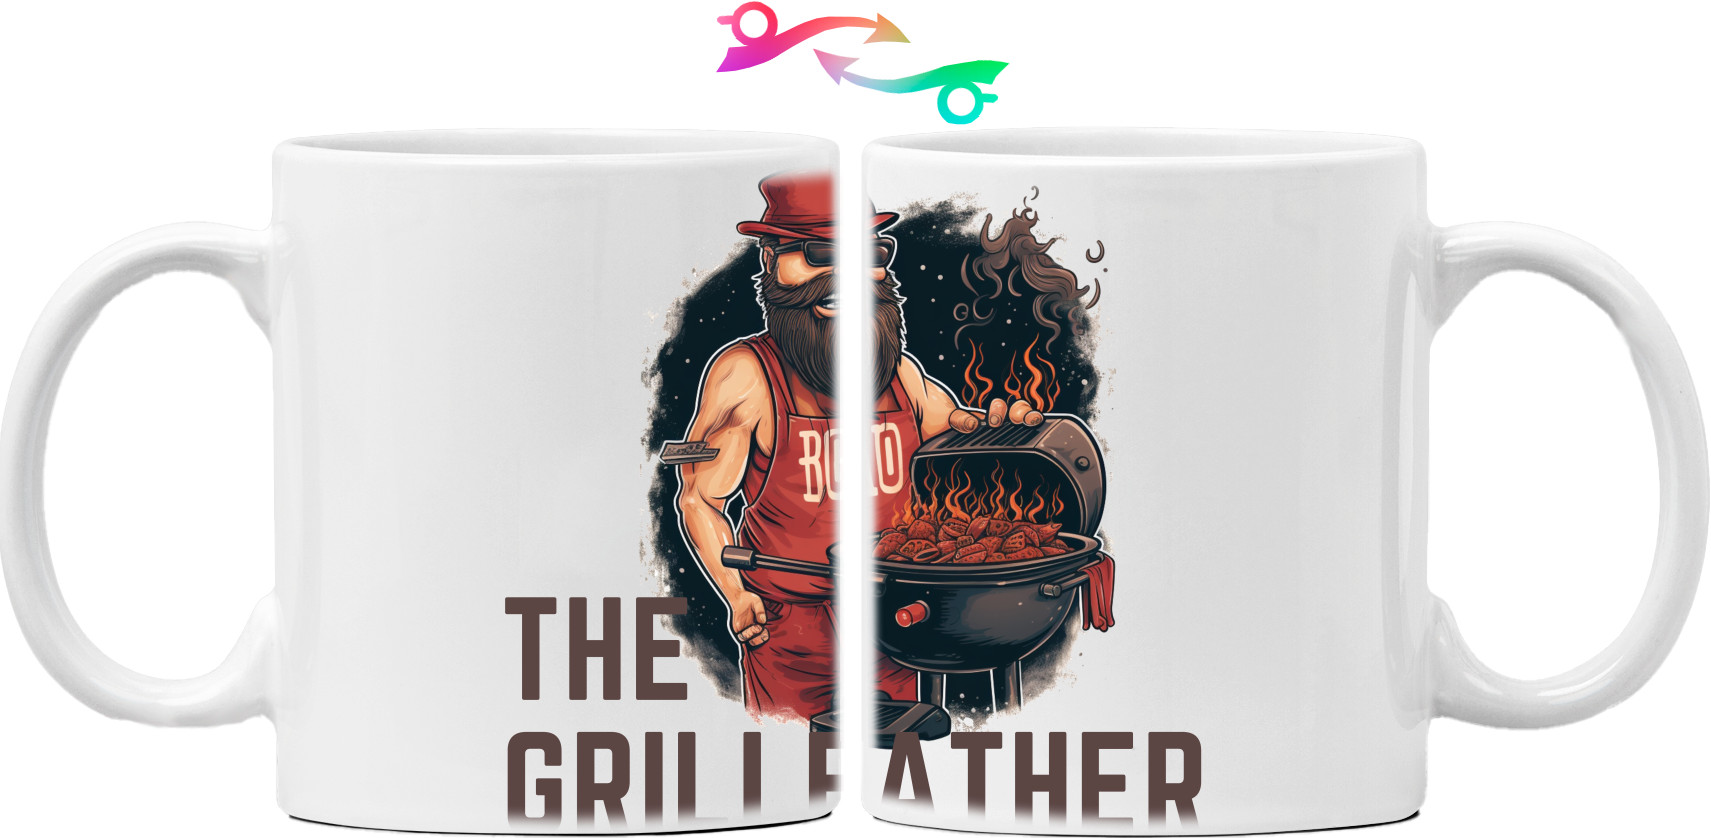 The Grillfather BBQ dad